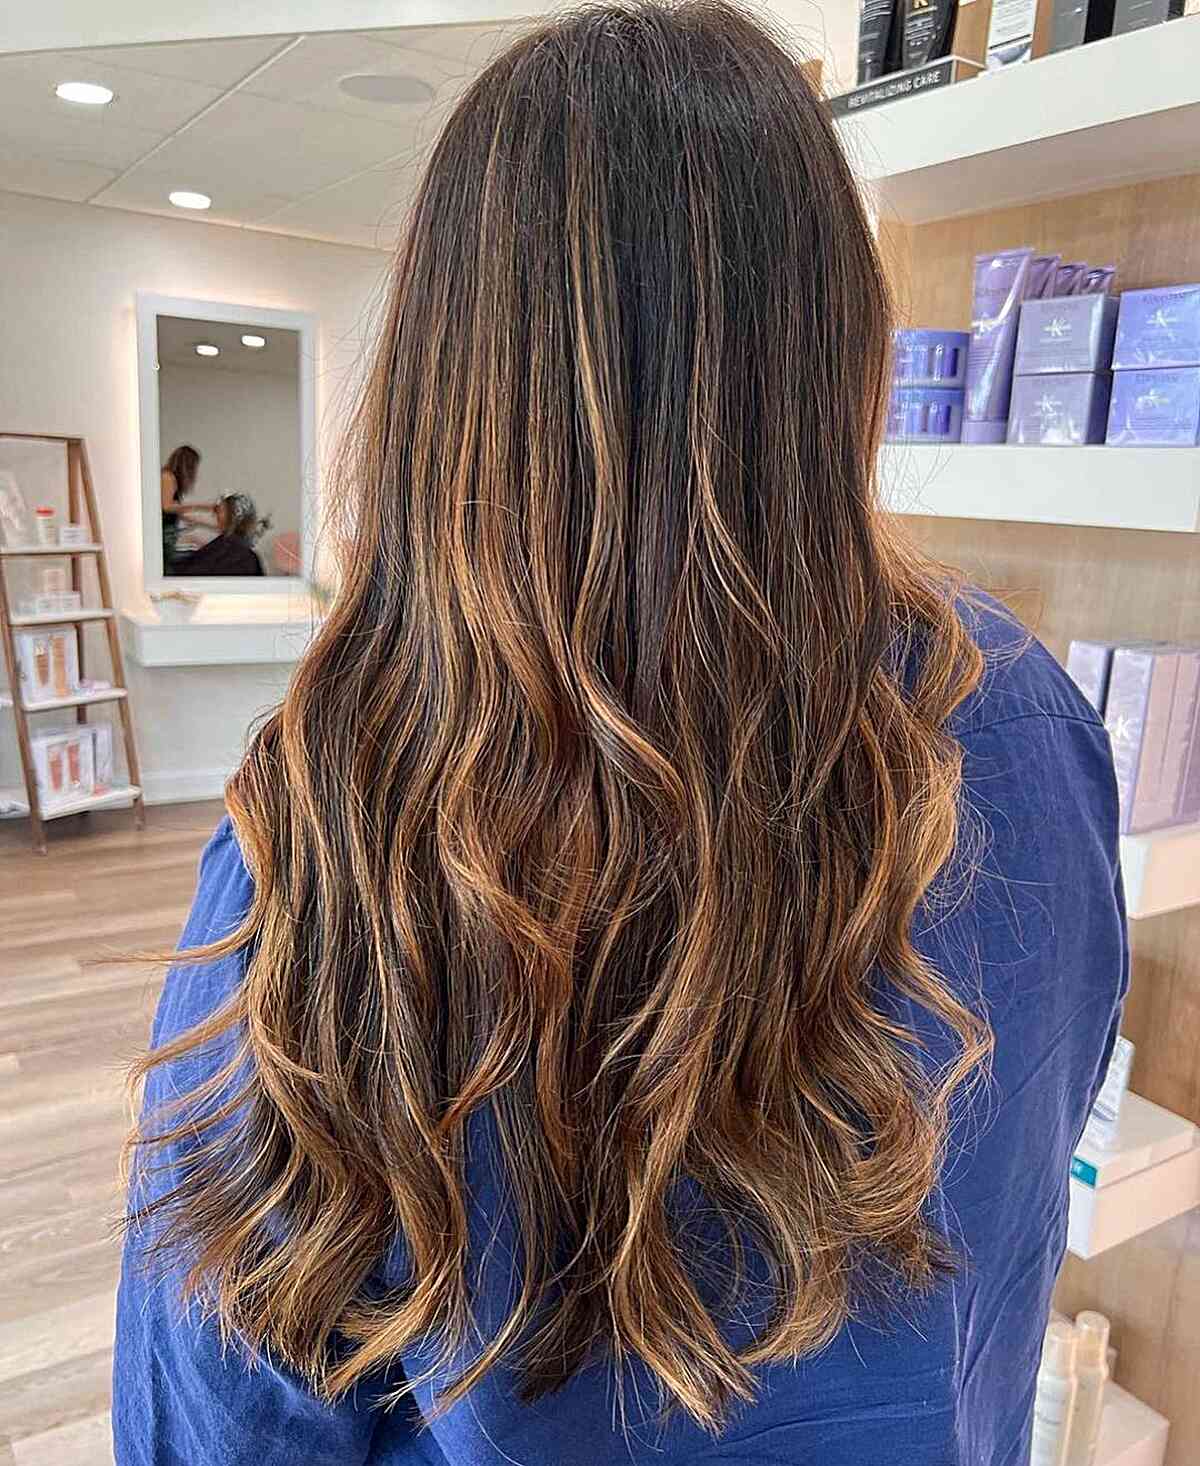 Soft Caramel Brown Ombre Balayage Highlights on Long Wavy Hair